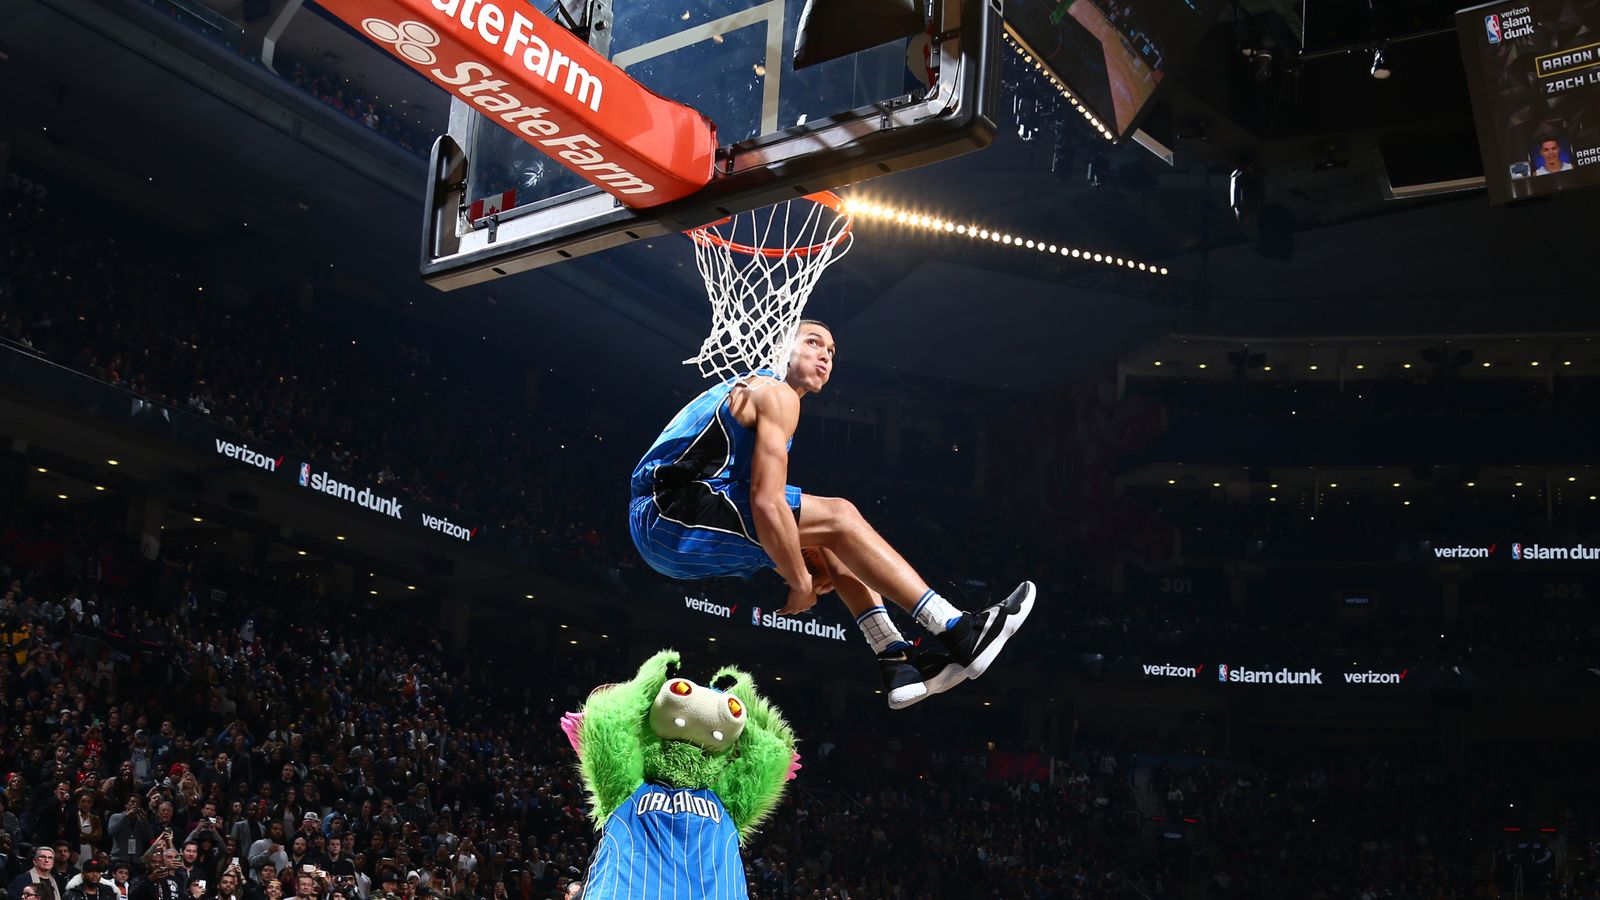 The best dunks from this year's dunk contest participants